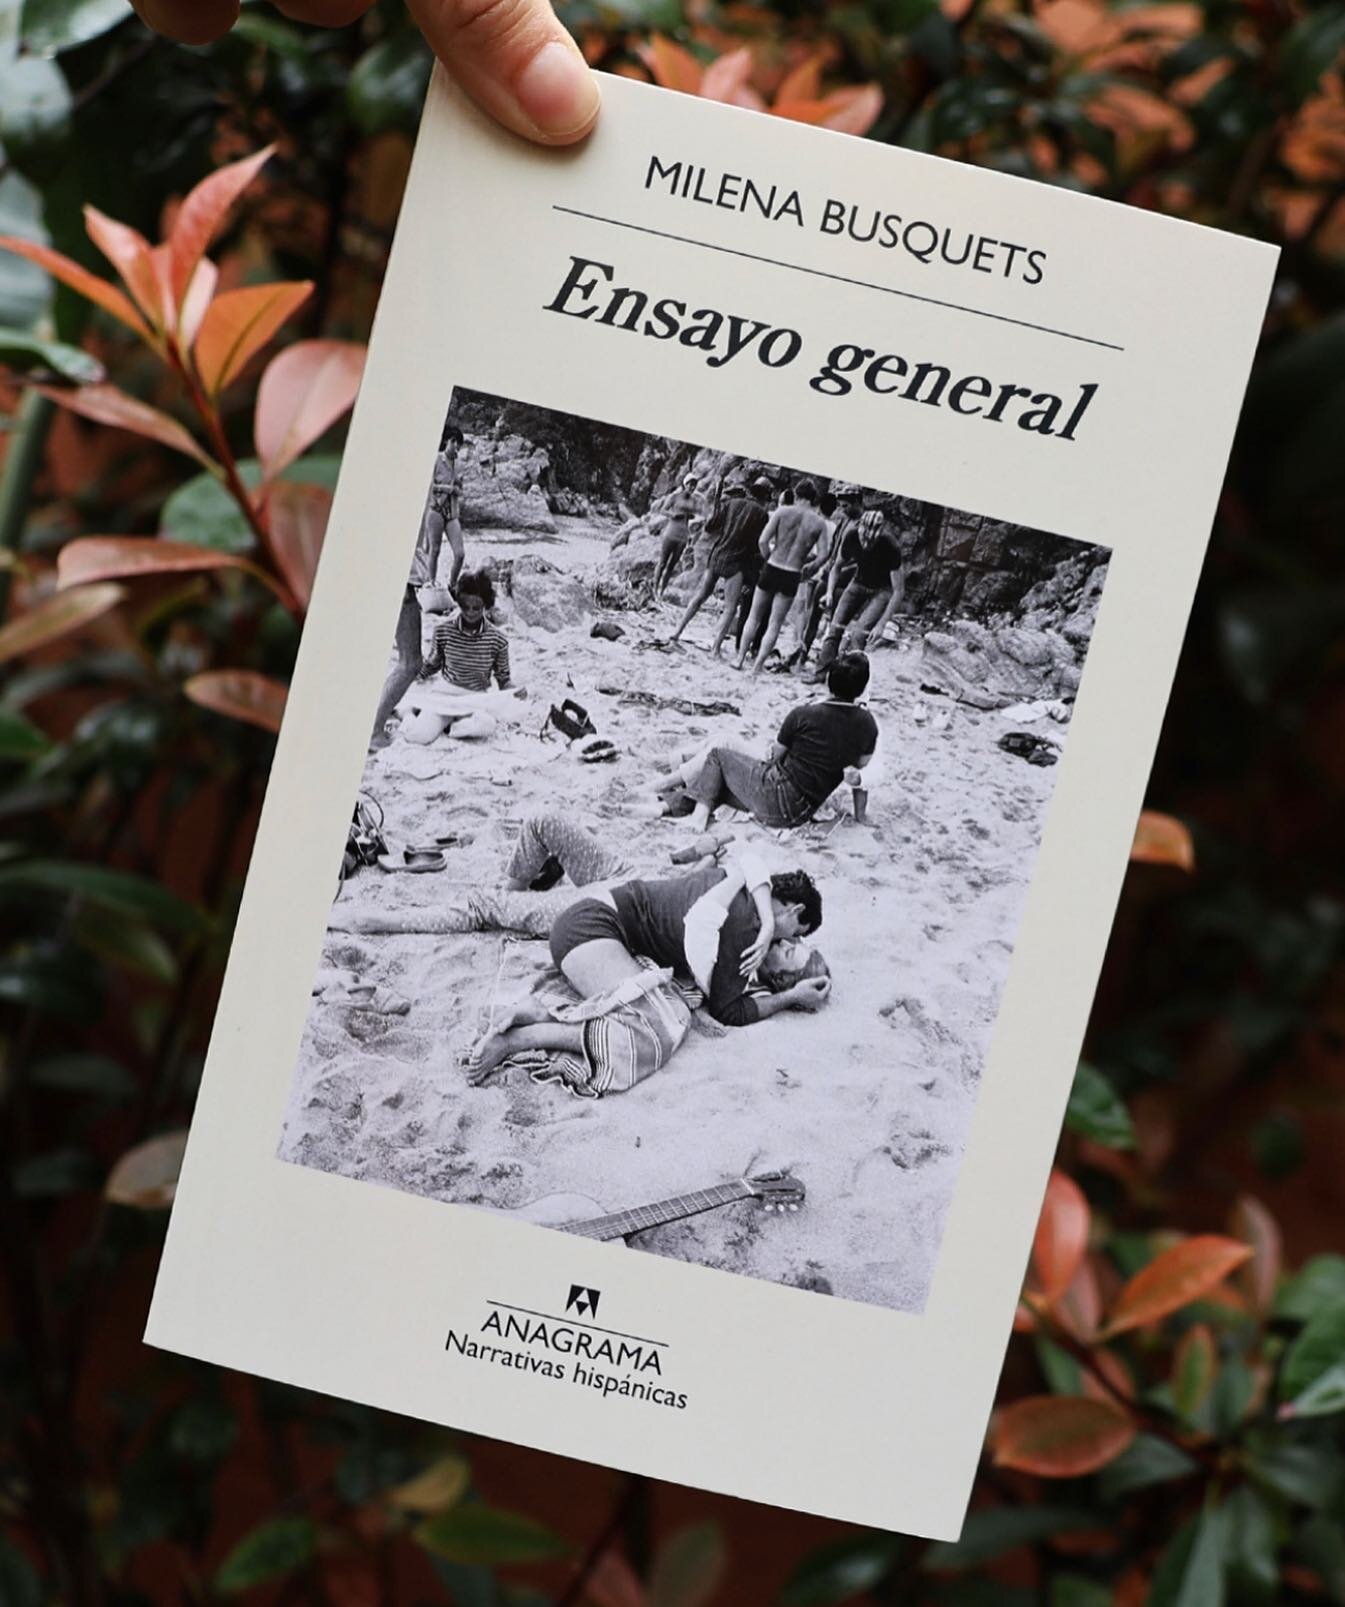 ENSAYO GENERAL [DRESS REHEARSAL] by Milena Busquets is out now with @anagramaeditor!

Using several of the &ldquo;genres&rdquo; (novel, auto fiction, essays, journal) given to writers to express themselves, Milena Busquets continues her quest to expl